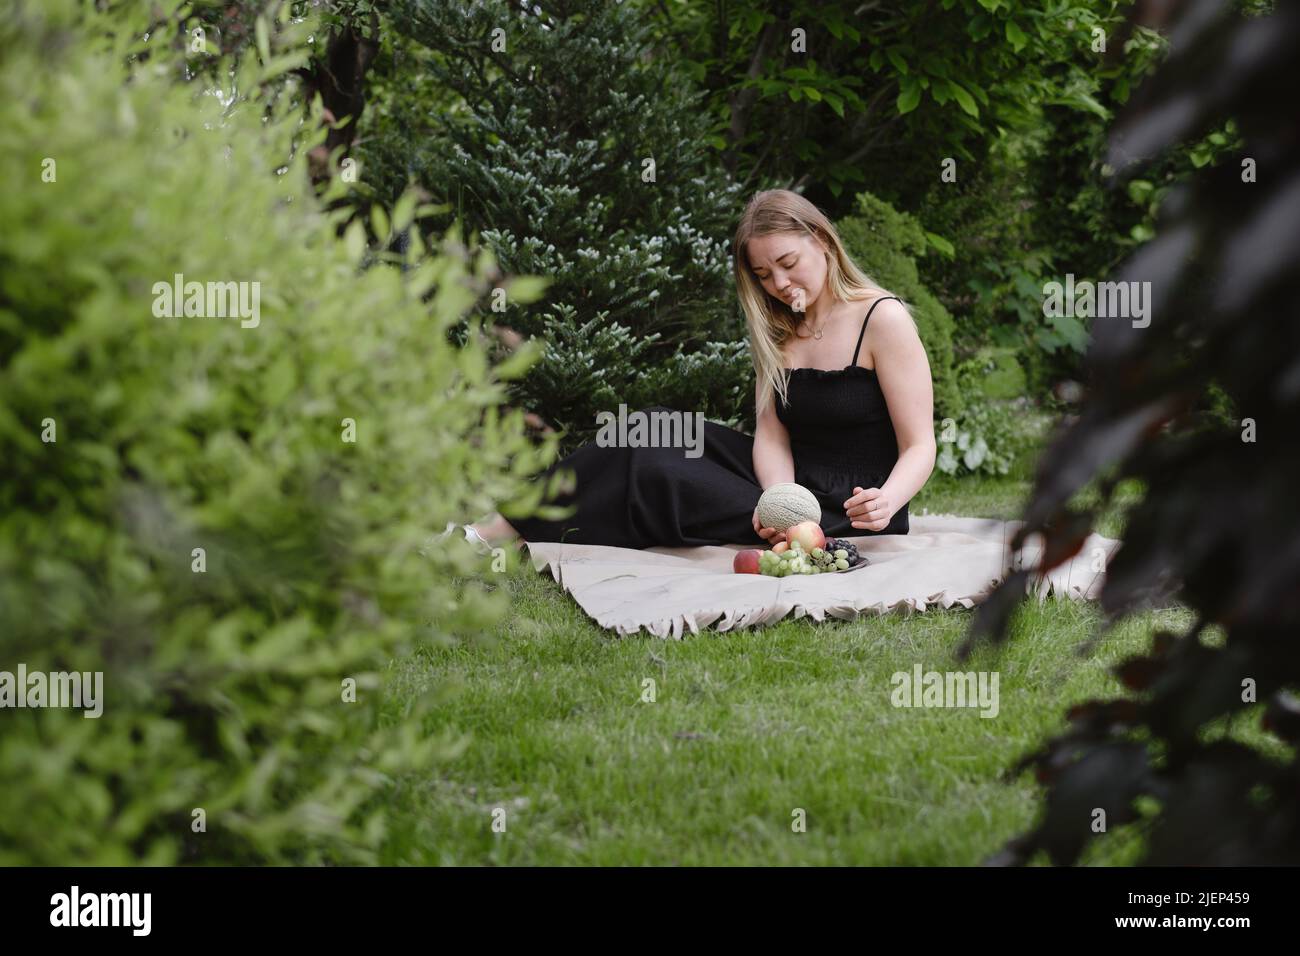 Woman on picnic in green garden On blanket. Cheerfully female spend time outdoors, eating summer fruits. Vegetarian eco idea for weekend picnic Stock Photo